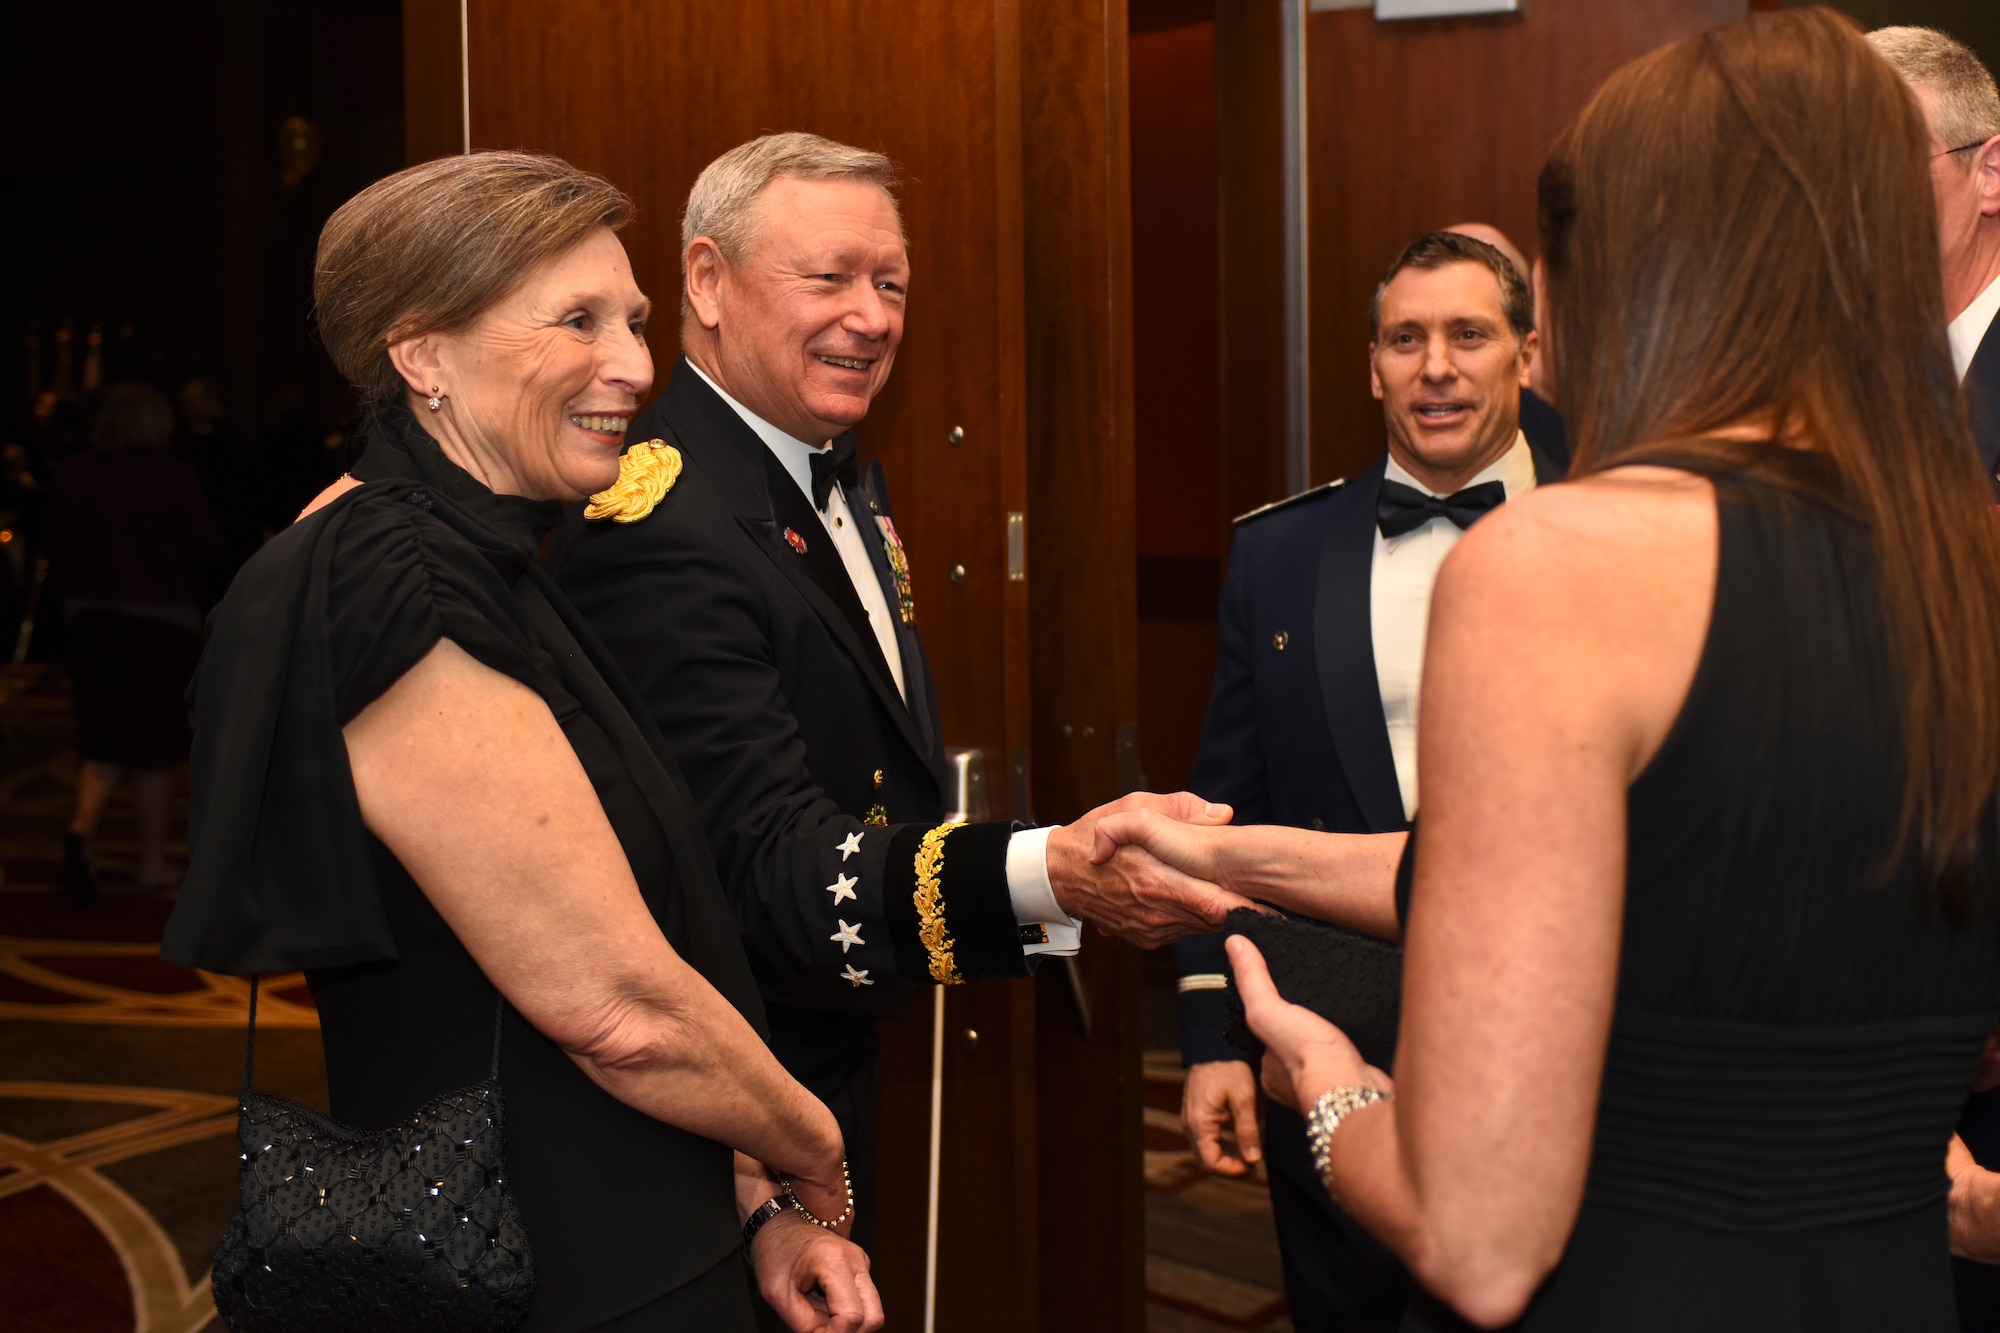 U.S. Army Gen. Frank J. Grass (middle left), Chief of the National Guard Bureau, and his wife, Patricia Grass (left), speak with attendees of the Ohio National Guard Association and Ohio National Guard Enlisted Association Spring Dinner Dance, Columbus, Ohio, April 25, 2015. Gen. Grass was the guest speaker at the event which is held annually for association members in both the Air and Army National Guard. (U.S. National Guard photo by Senior Airman Wendy Kuhn/Released)